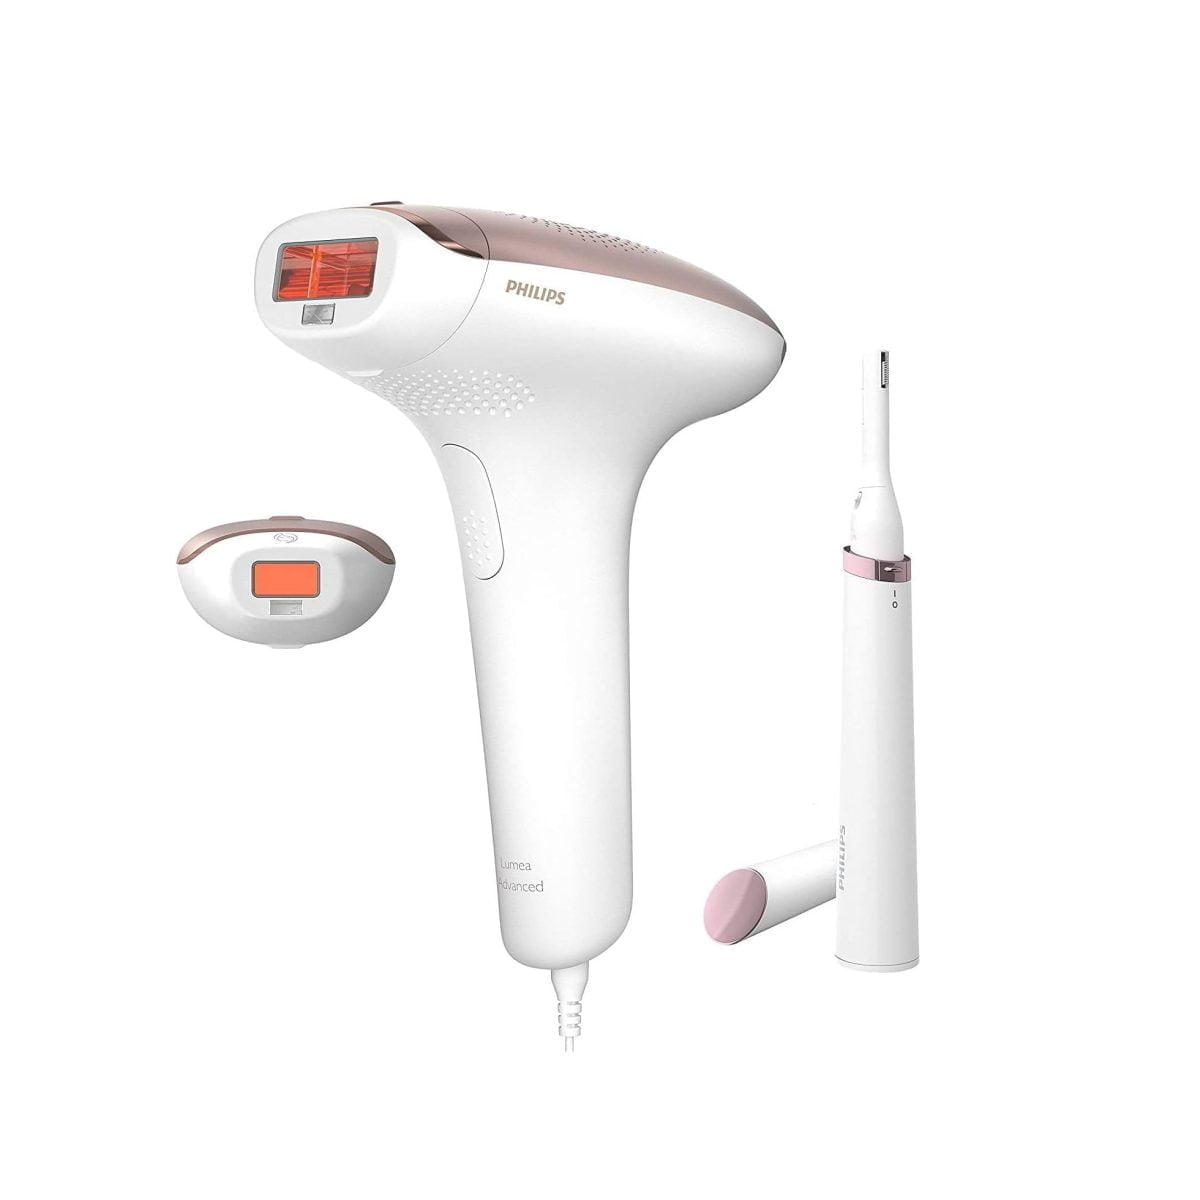 612Fwdavvil. Ac Sl1500 Philips The World’s First Ipl With Curved Attachments For Body And Face + Satin Compact Pen Trimmer &Amp;Lt;Ul Class=&Amp;Quot;P-Bullets&Amp;Quot;&Amp;Gt; &Amp;Lt;Li&Amp;Gt;Corded Only&Amp;Lt;/Li&Amp;Gt; &Amp;Lt;Li&Amp;Gt;Smartskin Sensor&Amp;Lt;/Li&Amp;Gt; &Amp;Lt;Li&Amp;Gt;Lumea Mobile App&Amp;Lt;/Li&Amp;Gt; &Amp;Lt;Li&Amp;Gt;5 Energy Settings&Amp;Lt;/Li&Amp;Gt; &Amp;Lt;/Ul&Amp;Gt; &Amp;Lt;H1&Amp;Gt;About The Product&Amp;Lt;/H1&Amp;Gt; &Amp;Lt;Ul Class=&Amp;Quot;A-Unordered-List A-Vertical A-Spacing-Mini&Amp;Quot;&Amp;Gt; &Amp;Lt;Li&Amp;Gt;&Amp;Lt;Span Class=&Amp;Quot;A-List-Item&Amp;Quot;&Amp;Gt;Expert Ipl Technology At Home, Developed With Dermatologists&Amp;Lt;/Span&Amp;Gt;&Amp;Lt;/Li&Amp;Gt; &Amp;Lt;Li&Amp;Gt;&Amp;Lt;Span Class=&Amp;Quot;A-List-Item&Amp;Quot;&Amp;Gt;Proven Safe And Effective Treatment&Amp;Lt;/Span&Amp;Gt;&Amp;Lt;/Li&Amp;Gt; &Amp;Lt;Li&Amp;Gt;&Amp;Lt;Span Class=&Amp;Quot;A-List-Item&Amp;Quot;&Amp;Gt;Suitable For A Wide Variety Of Hair And Skin Types&Amp;Lt;/Span&Amp;Gt;&Amp;Lt;/Li&Amp;Gt; &Amp;Lt;Li&Amp;Gt;&Amp;Lt;Span Class=&Amp;Quot;A-List-Item&Amp;Quot;&Amp;Gt;Safe And Effective Even On Sensitive Areas&Amp;Lt;/Span&Amp;Gt;&Amp;Lt;/Li&Amp;Gt; &Amp;Lt;Li&Amp;Gt;&Amp;Lt;Span Class=&Amp;Quot;A-List-Item&Amp;Quot;&Amp;Gt;Large Treatment Window For Fast Application&Amp;Lt;/Span&Amp;Gt;&Amp;Lt;/Li&Amp;Gt; &Amp;Lt;Li&Amp;Gt;&Amp;Lt;Span Class=&Amp;Quot;A-List-Item&Amp;Quot;&Amp;Gt;Free Lumea App For A Personal Coach At Your Fingertips&Amp;Lt;/Span&Amp;Gt;&Amp;Lt;/Li&Amp;Gt; &Amp;Lt;Li&Amp;Gt;&Amp;Lt;Span Class=&Amp;Quot;A-List-Item&Amp;Quot;&Amp;Gt;Precision Attachment For Extra Safety On The Face&Amp;Lt;/Span&Amp;Gt;&Amp;Lt;/Li&Amp;Gt; &Amp;Lt;/Ul&Amp;Gt; Philips Ipl Hair Removal | Lumea Advanced | Full Body And Face Bri921